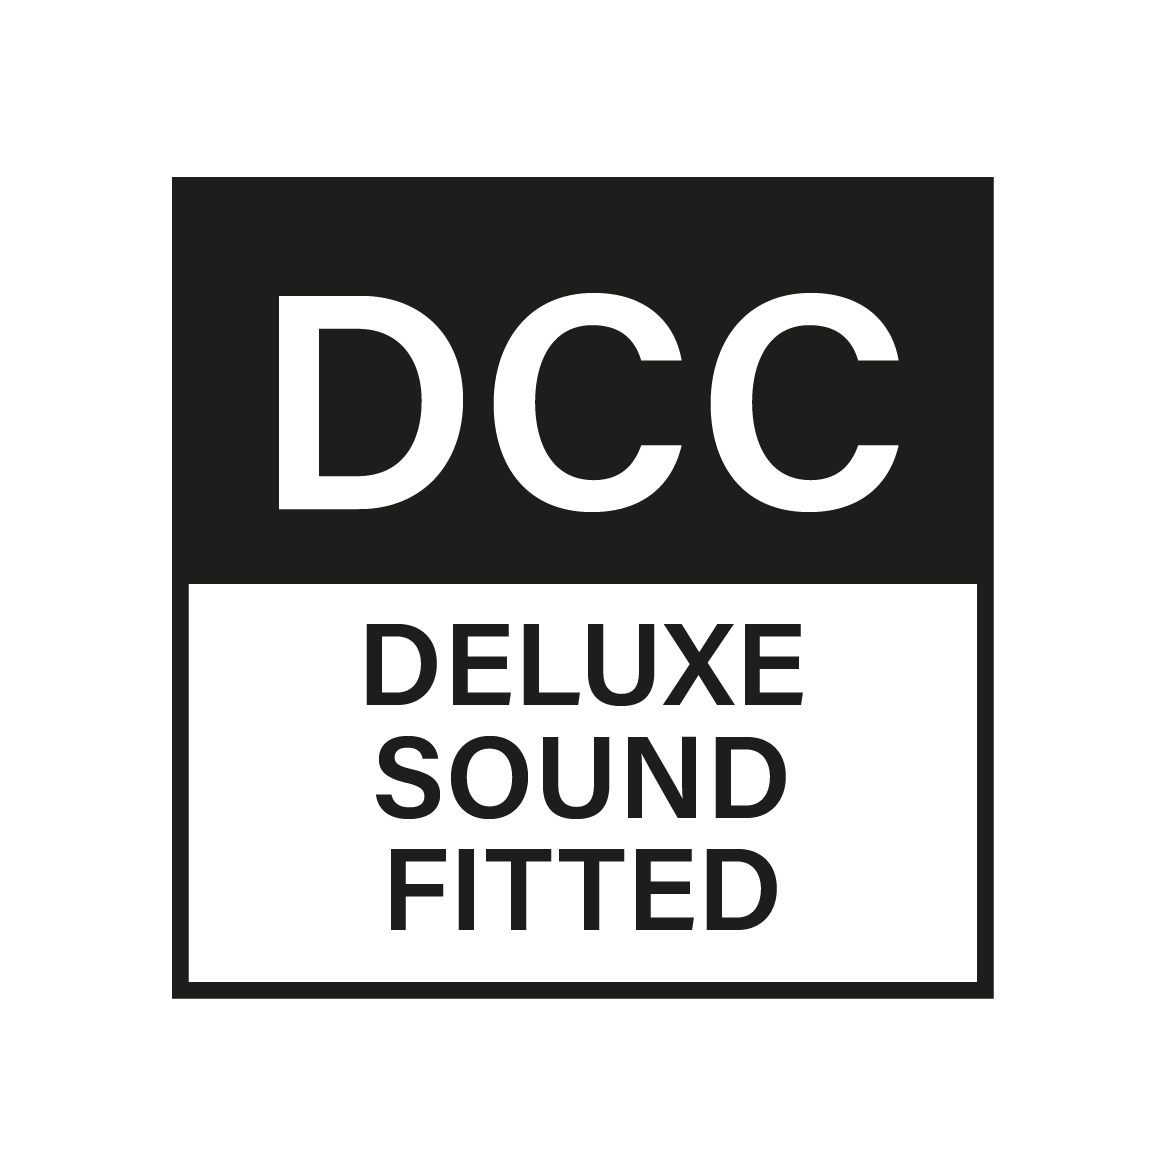 Sound Deluxe Fitted